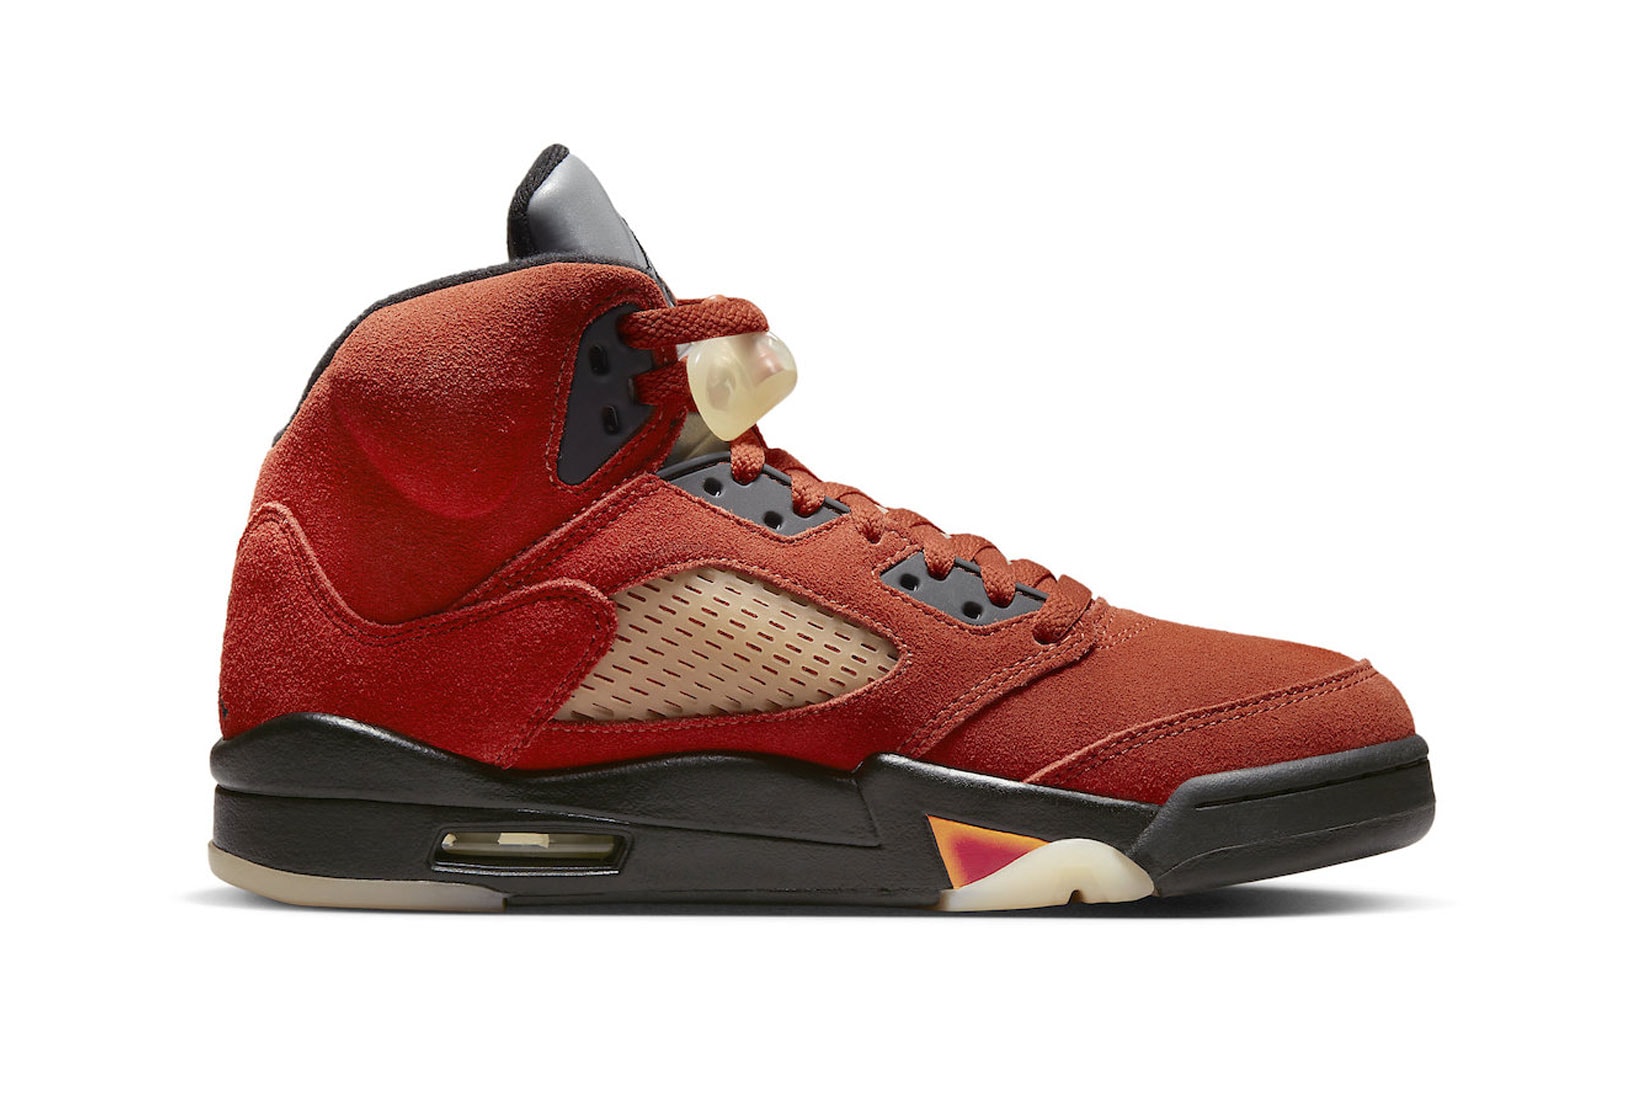 Nike Air Jordan 5 Mars for Her Womens Exclusive Martian Sunrise Fire Red Muslin Images Release